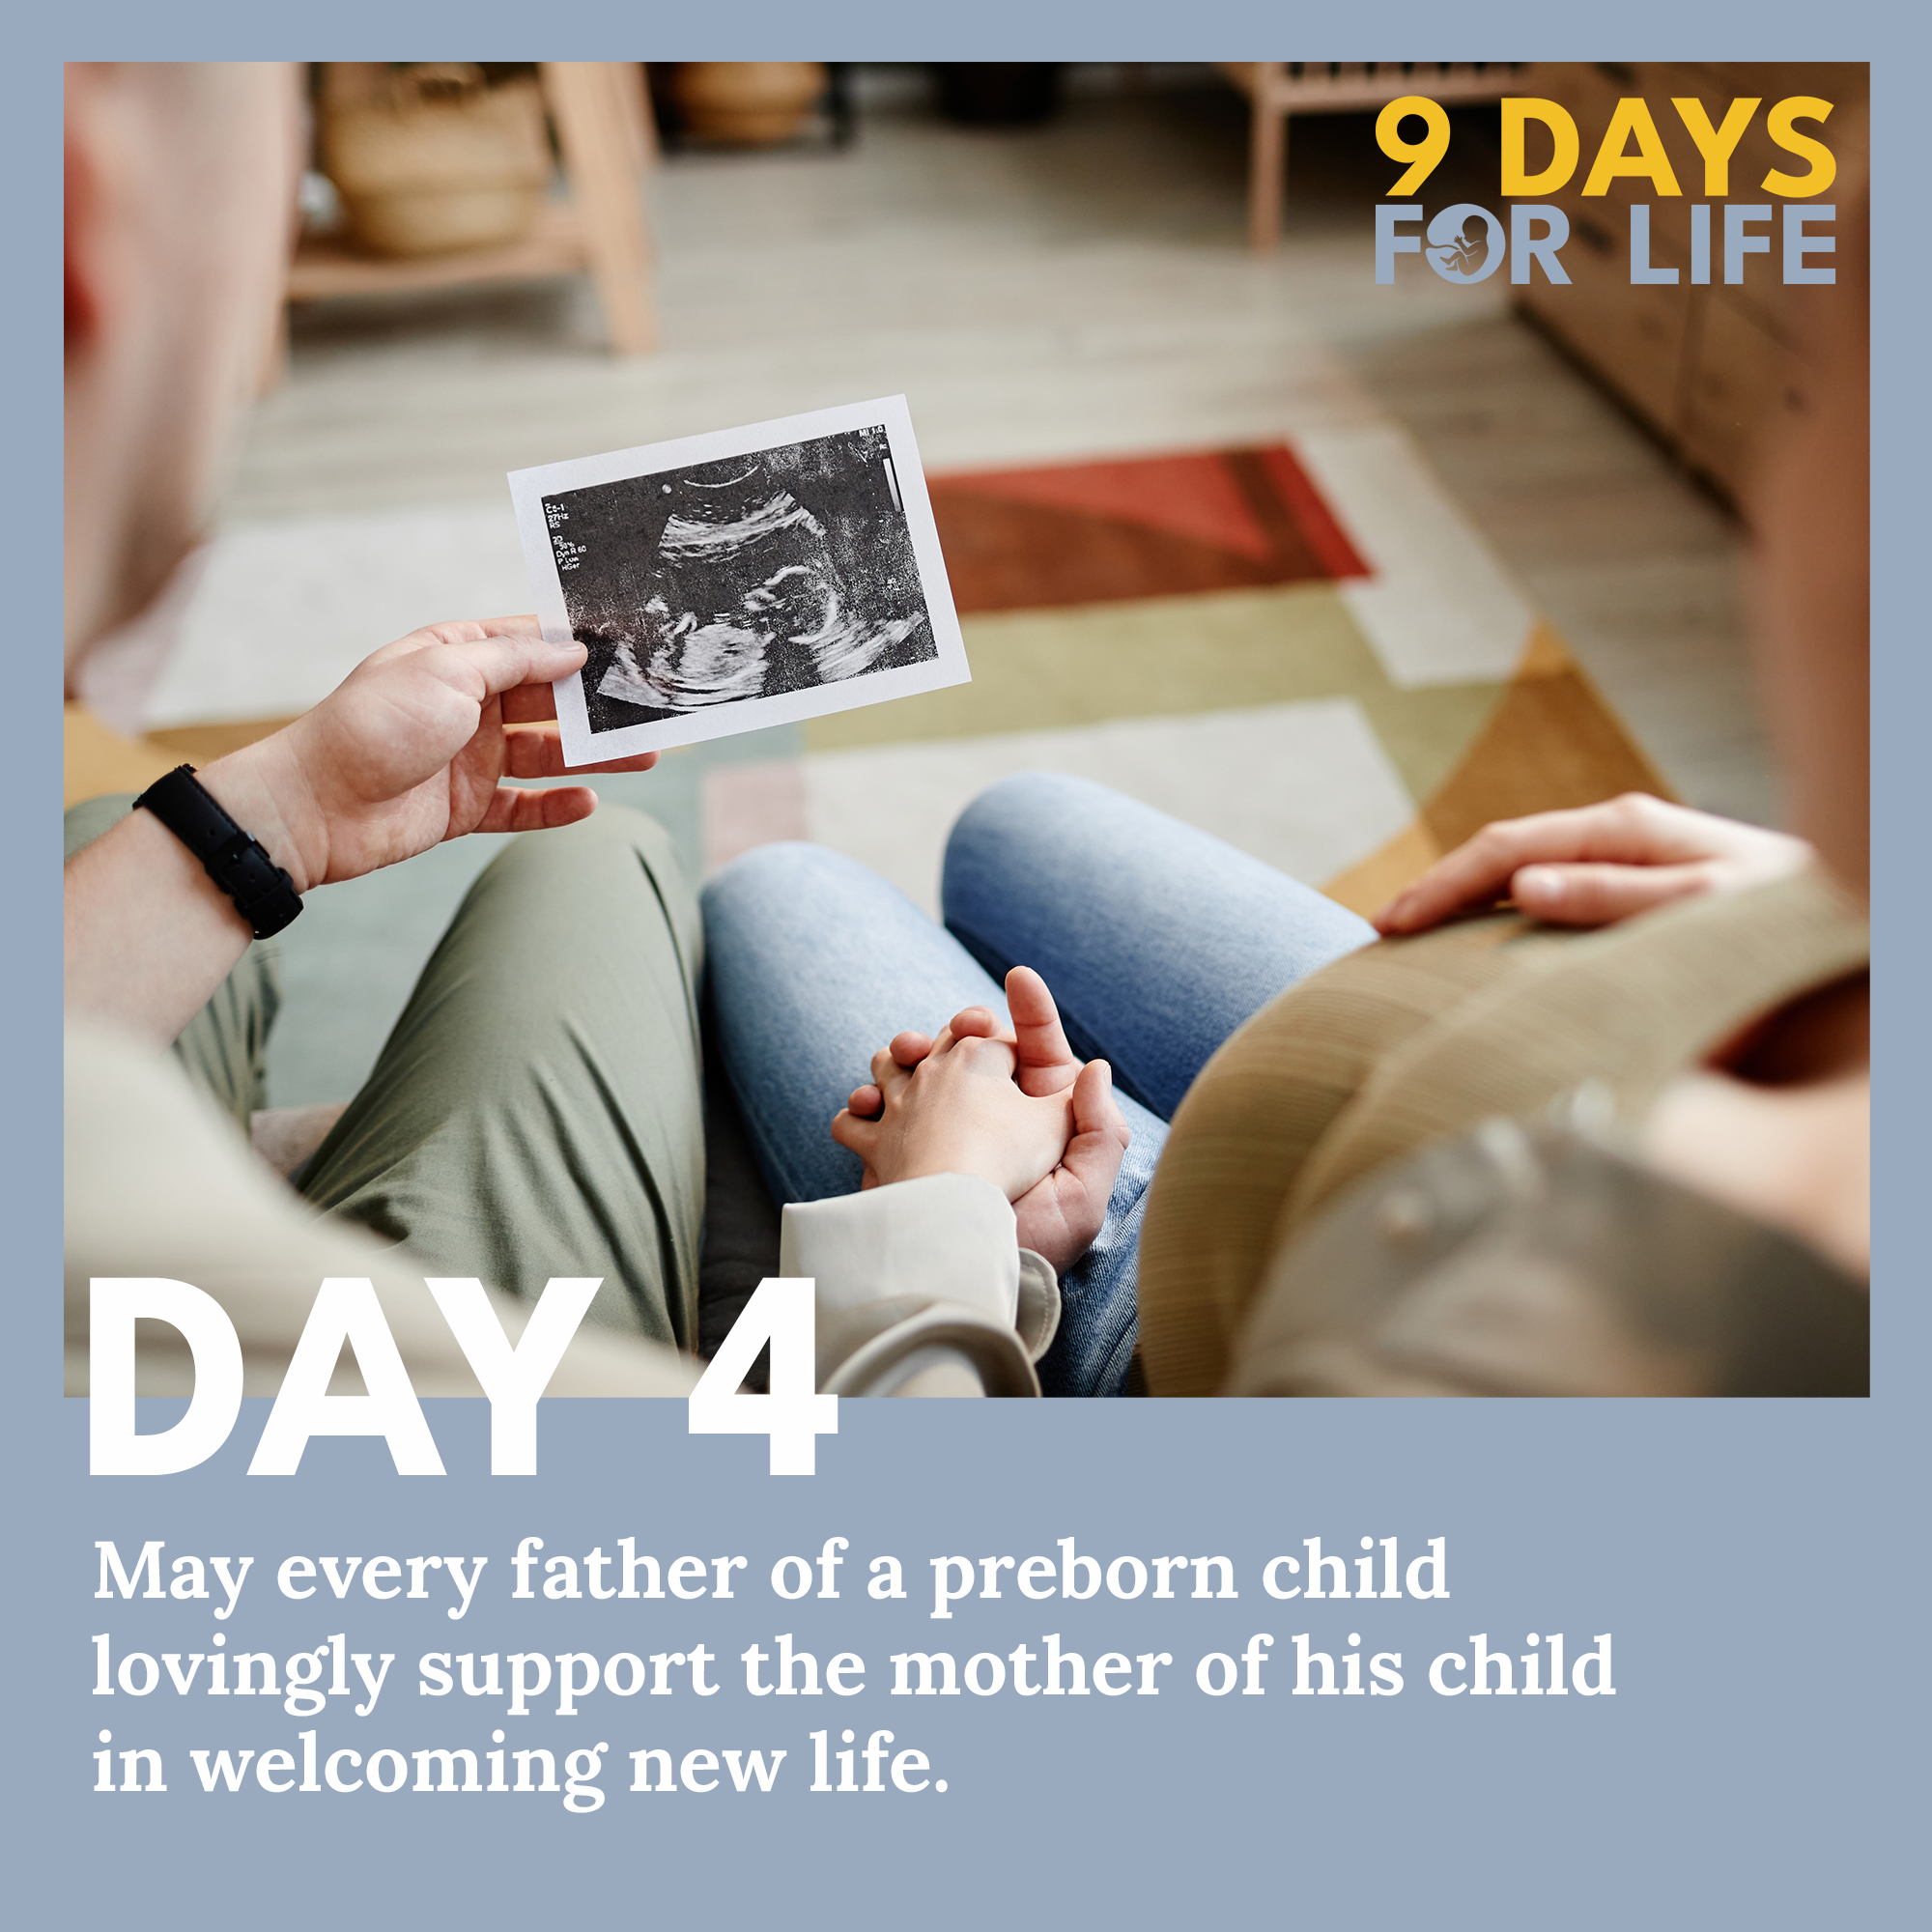 Day 4 - Nine Days for Life - A Couple holding hands